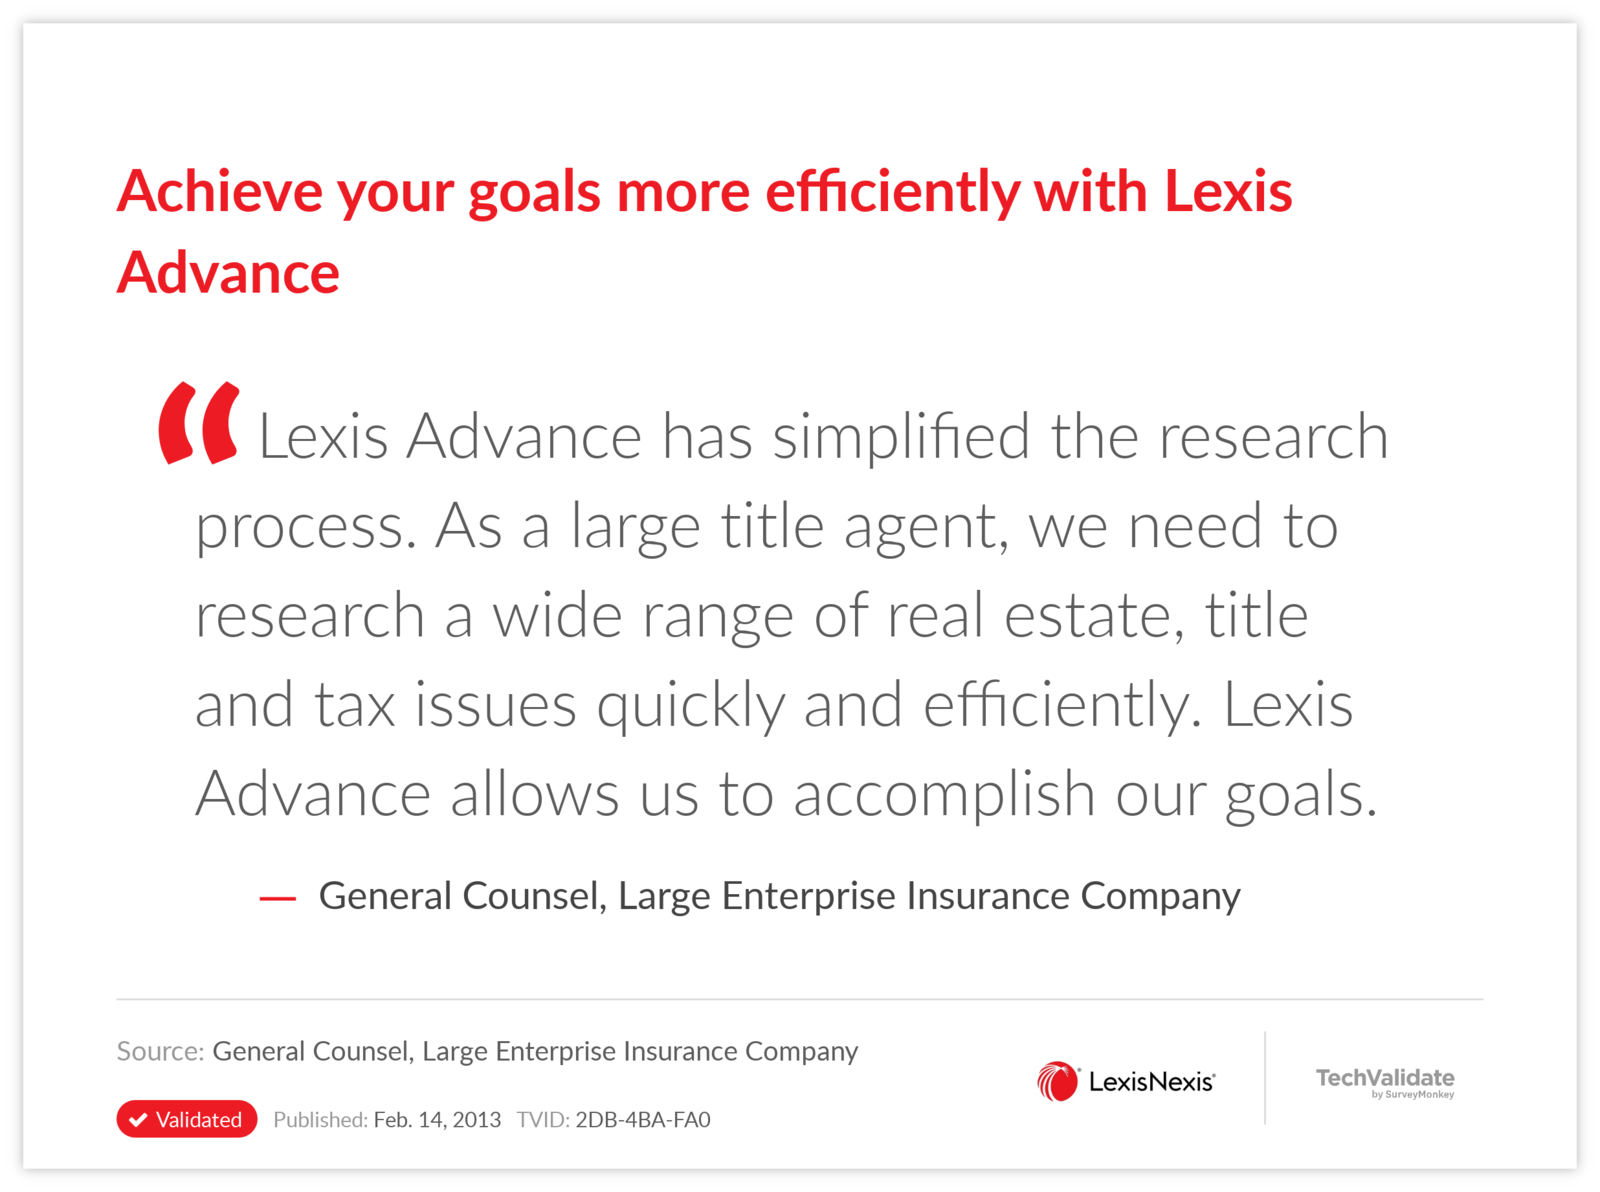 Achieve your goals more efficiently with Lexis Advance